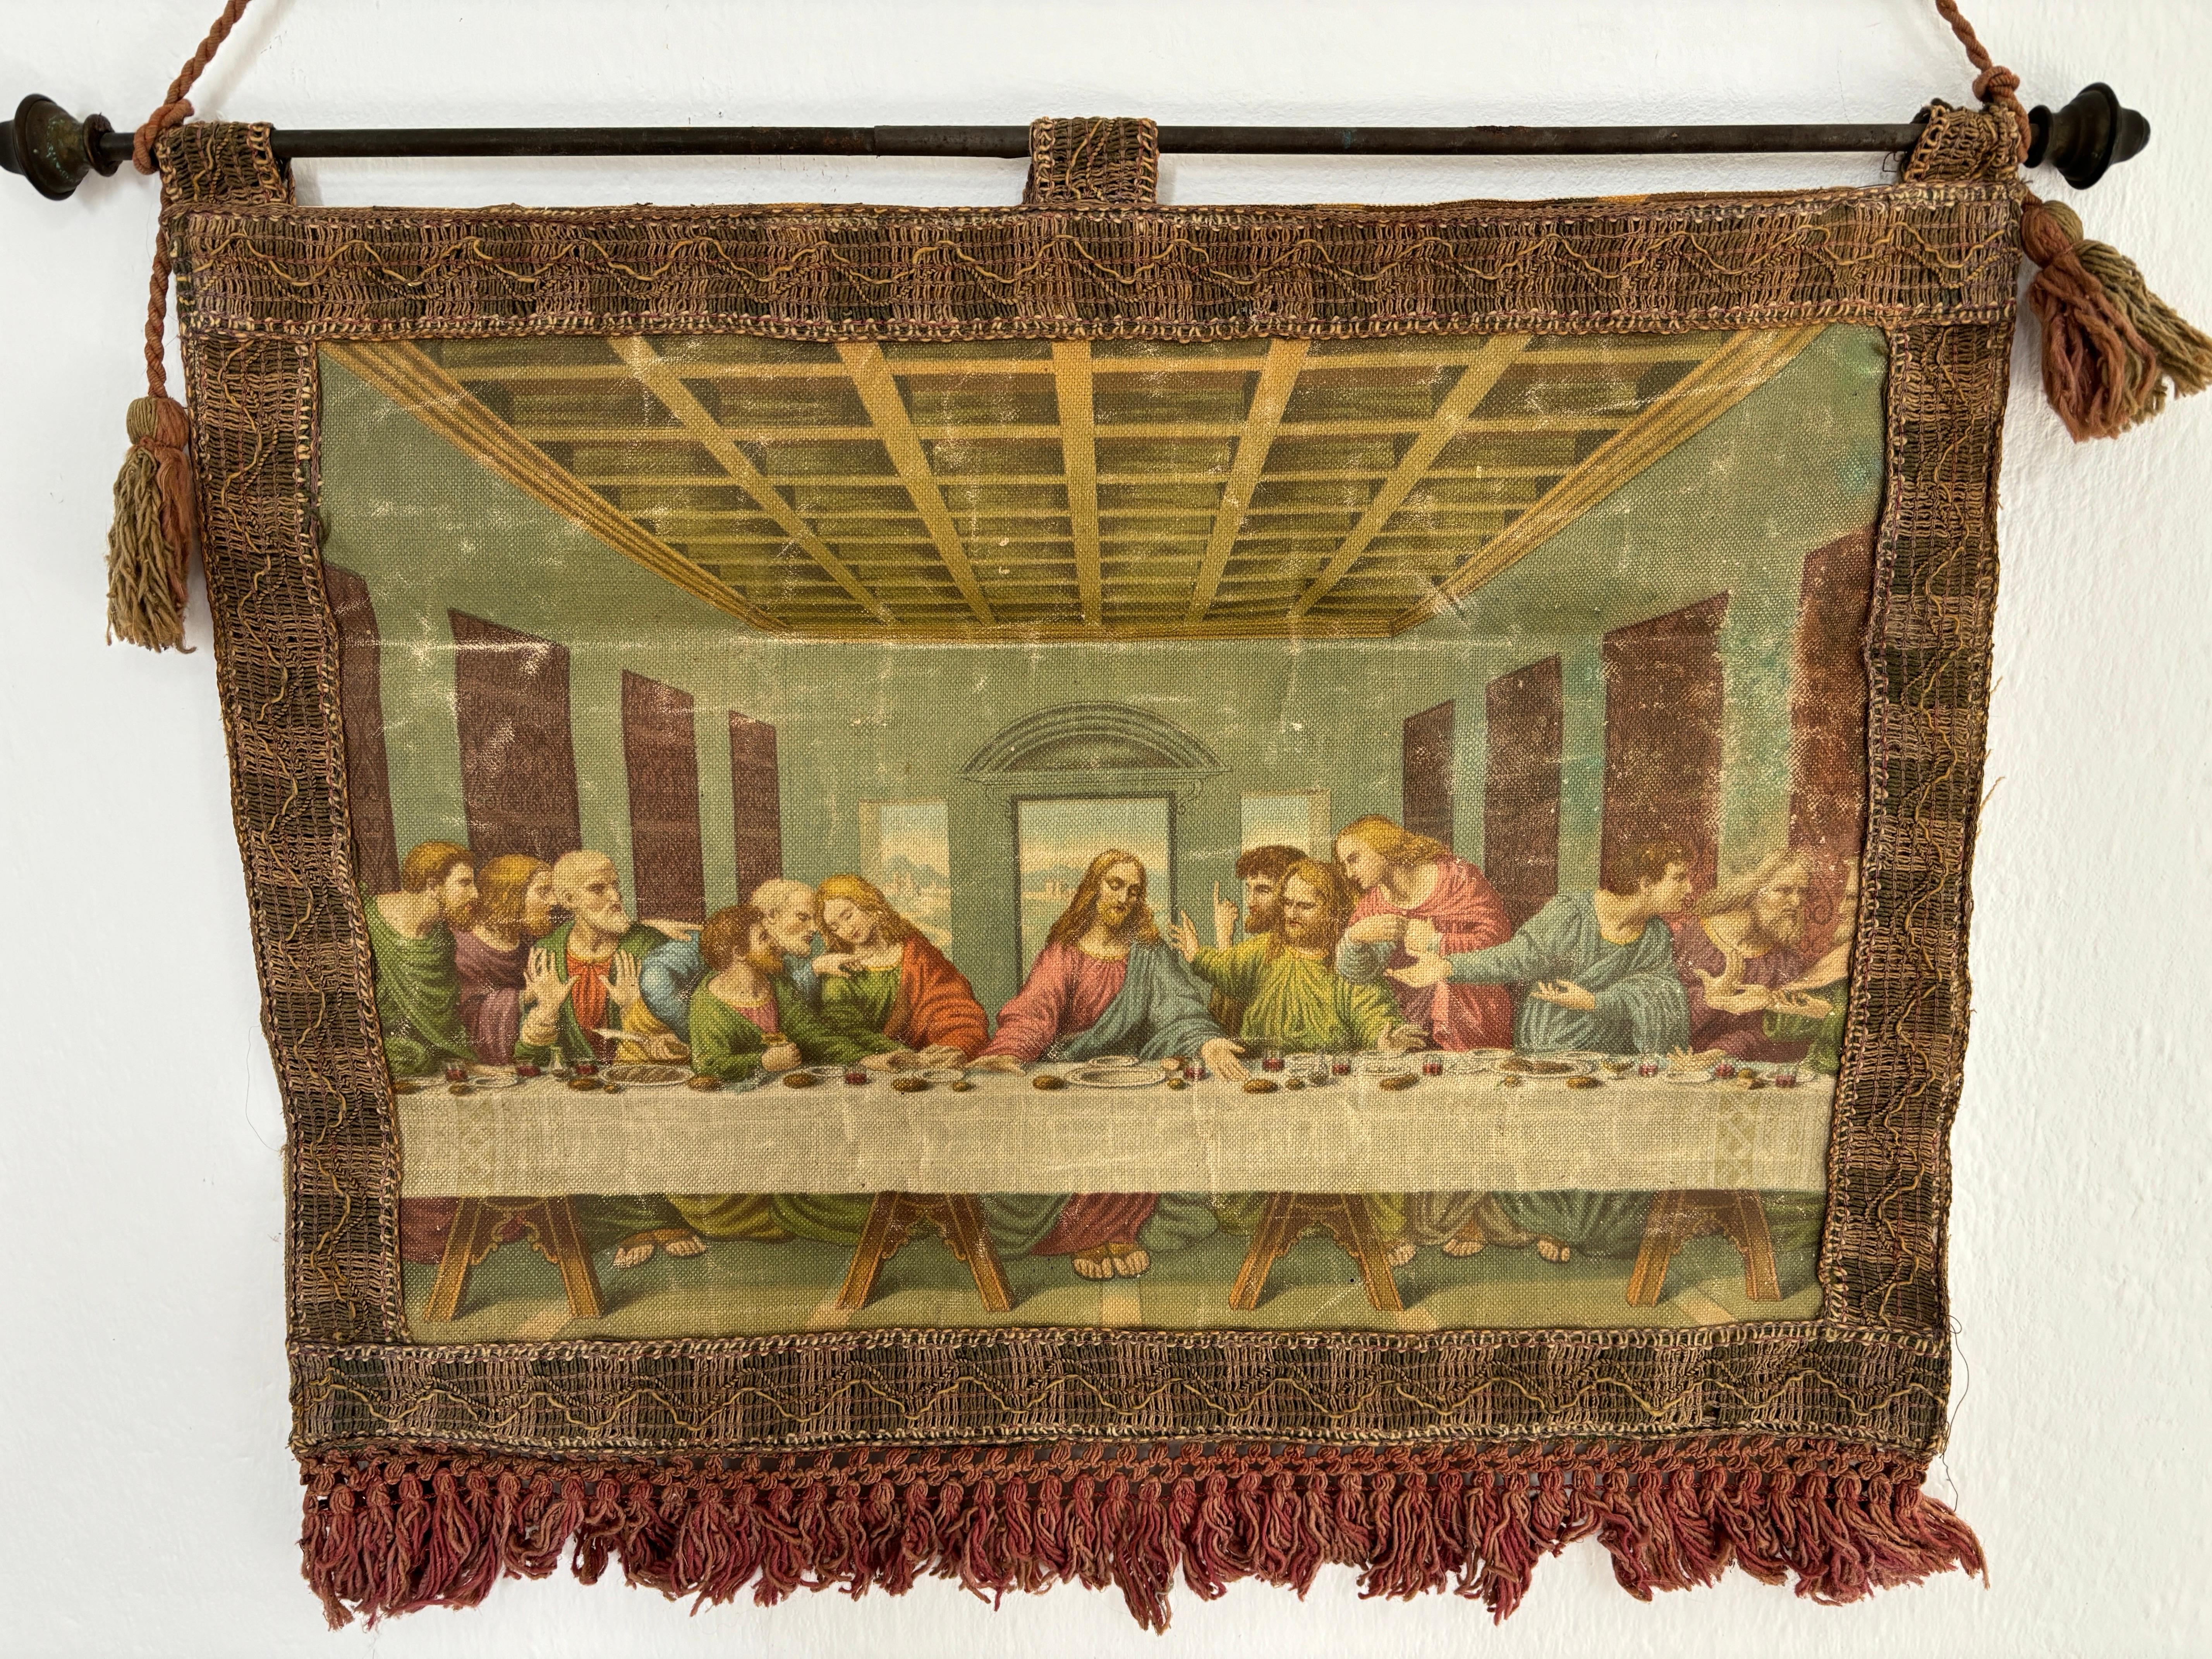 Beautiful oleograph of The last supper.  Original metal rod.. Free priority UPS shipping from Italy, no custom fees. Rare small size. Adding another 15 inches of rope to hang.  